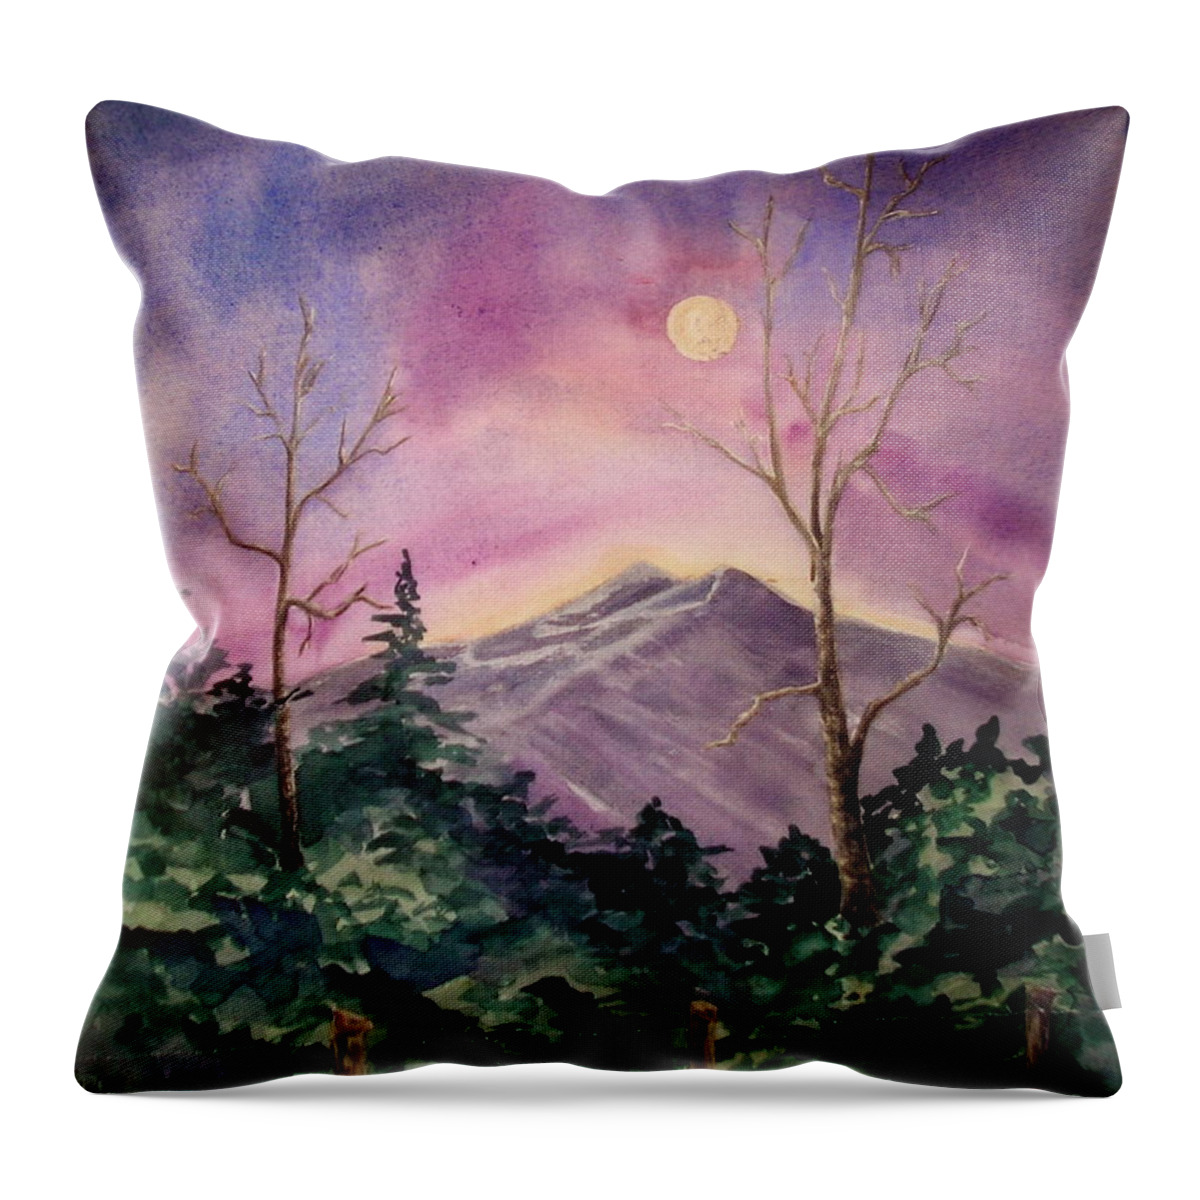 Landscape Throw Pillow featuring the painting Moonlight Mountain by Genie Morgan